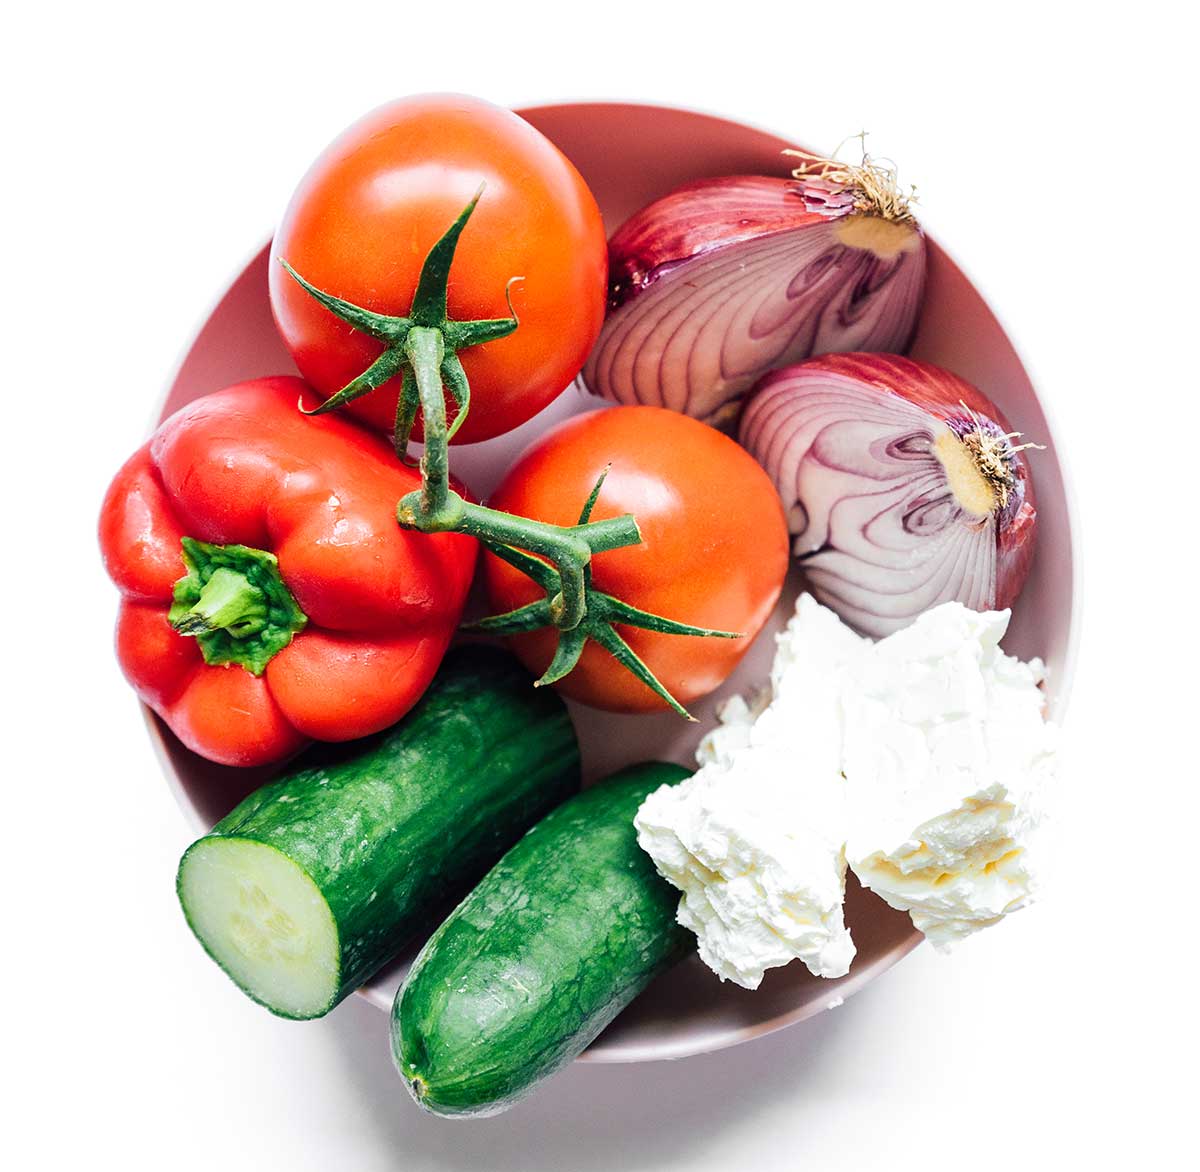 A bowl filled with two tomatoes, a red onion chopped in half, two blocks of feta cheese, a cucumber chopped in half, and a red bell pepper